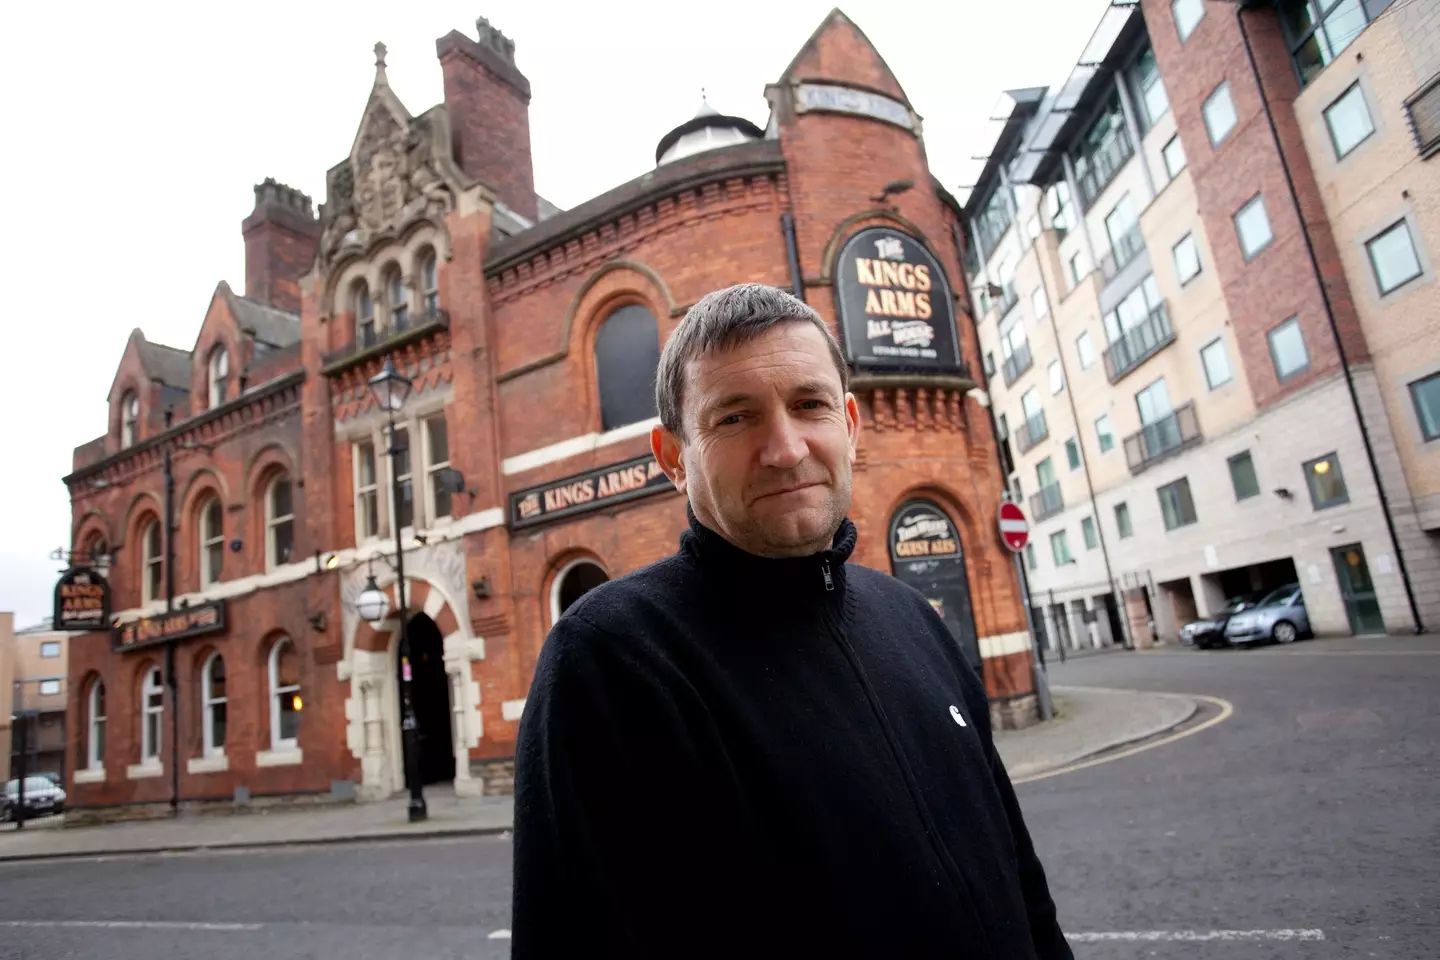 Paul Heaton is giving fans free beer to mark his 60th birthday.